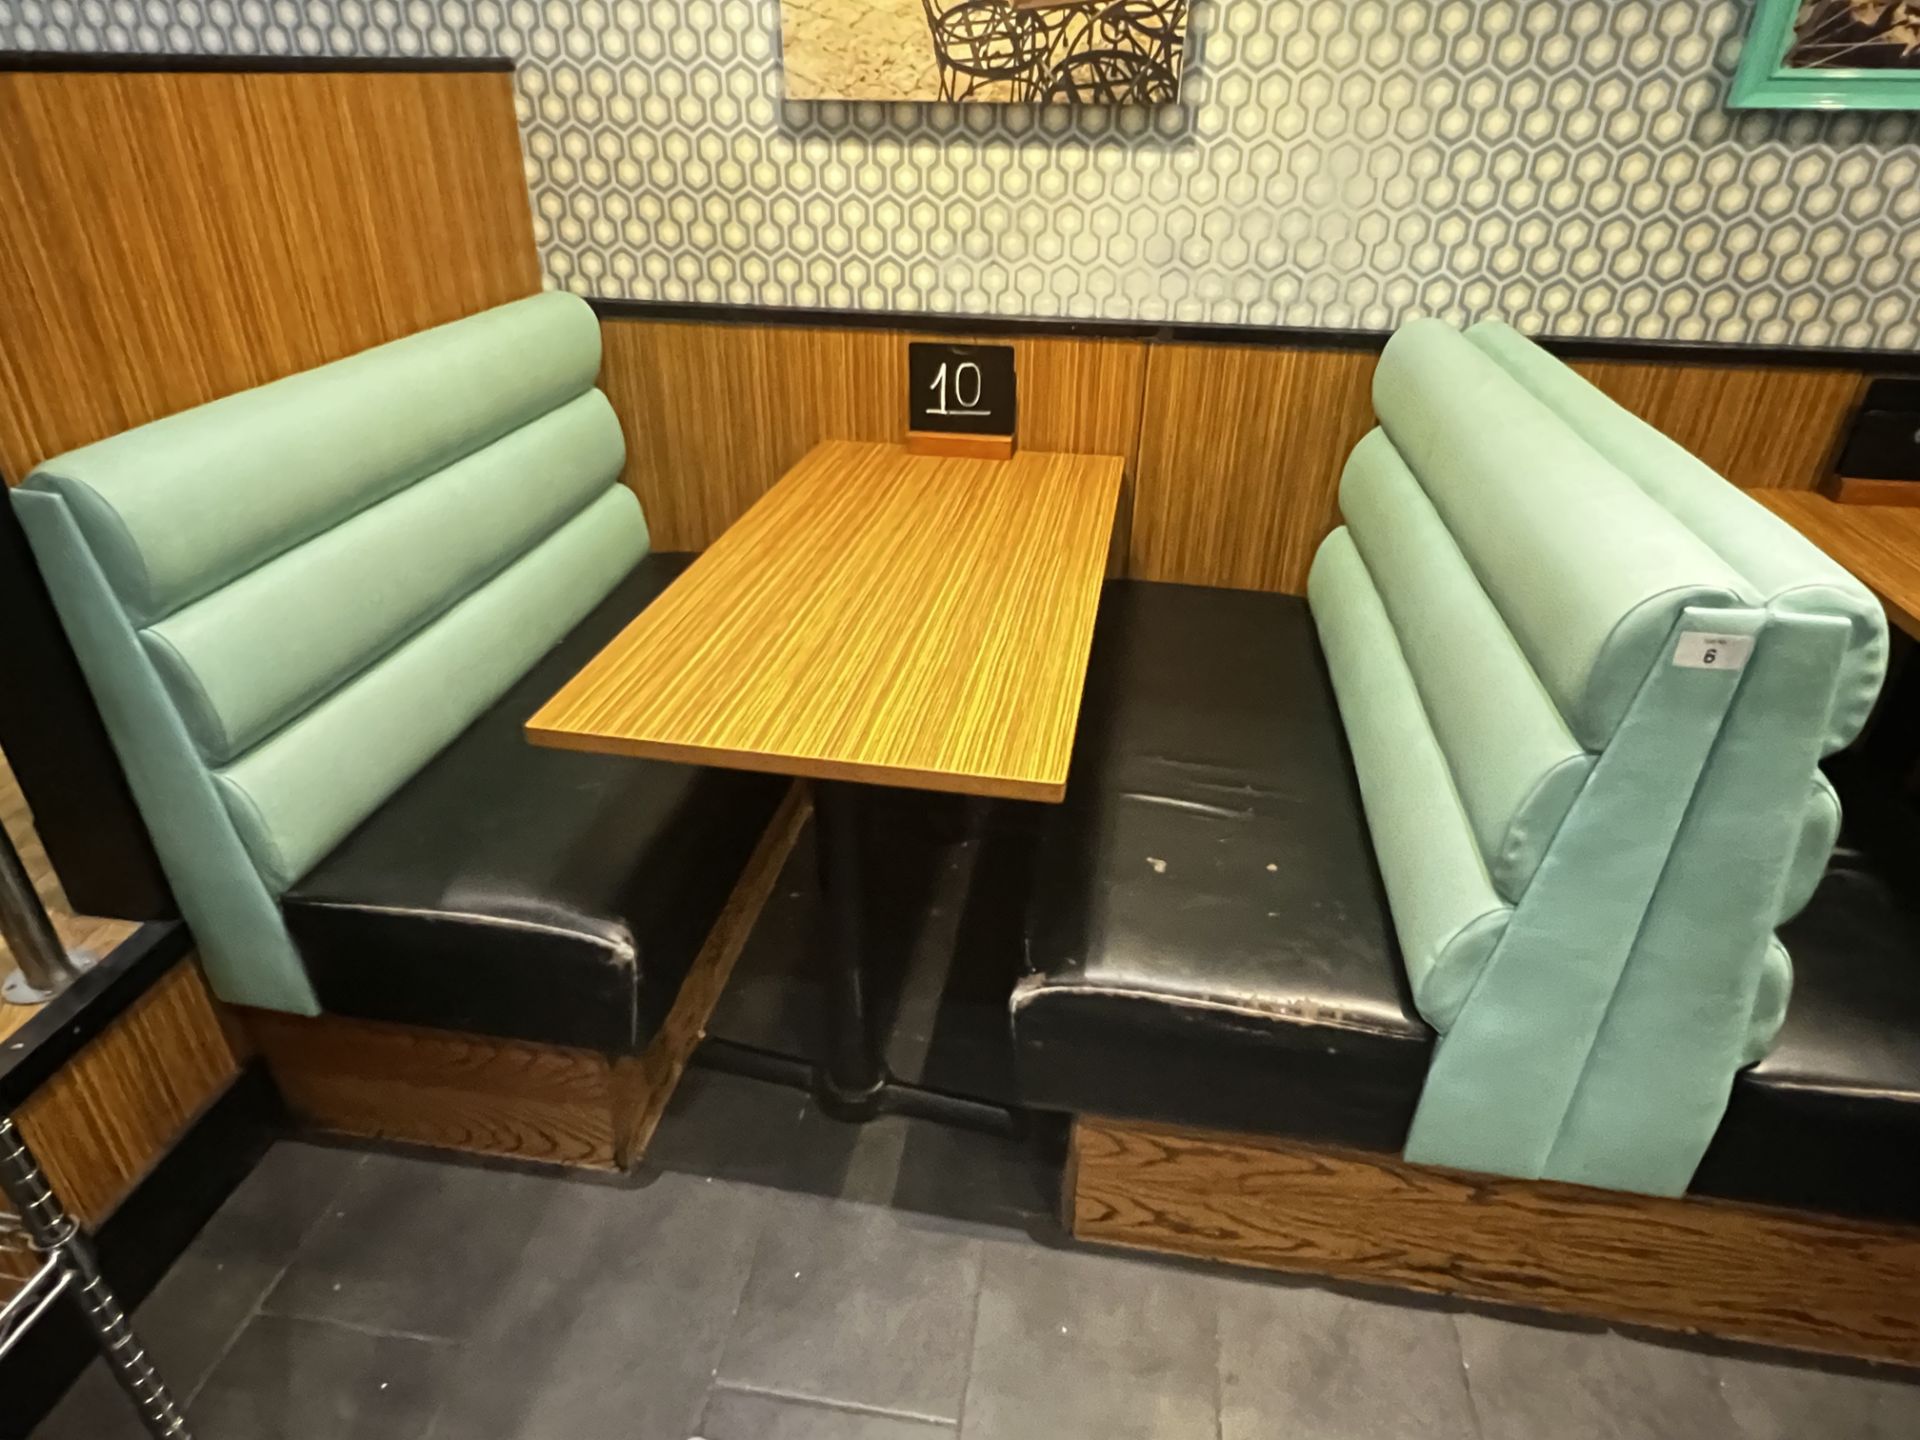 4 x Upholstered bench seats with 2 x tables 1.2M long - Image 2 of 3